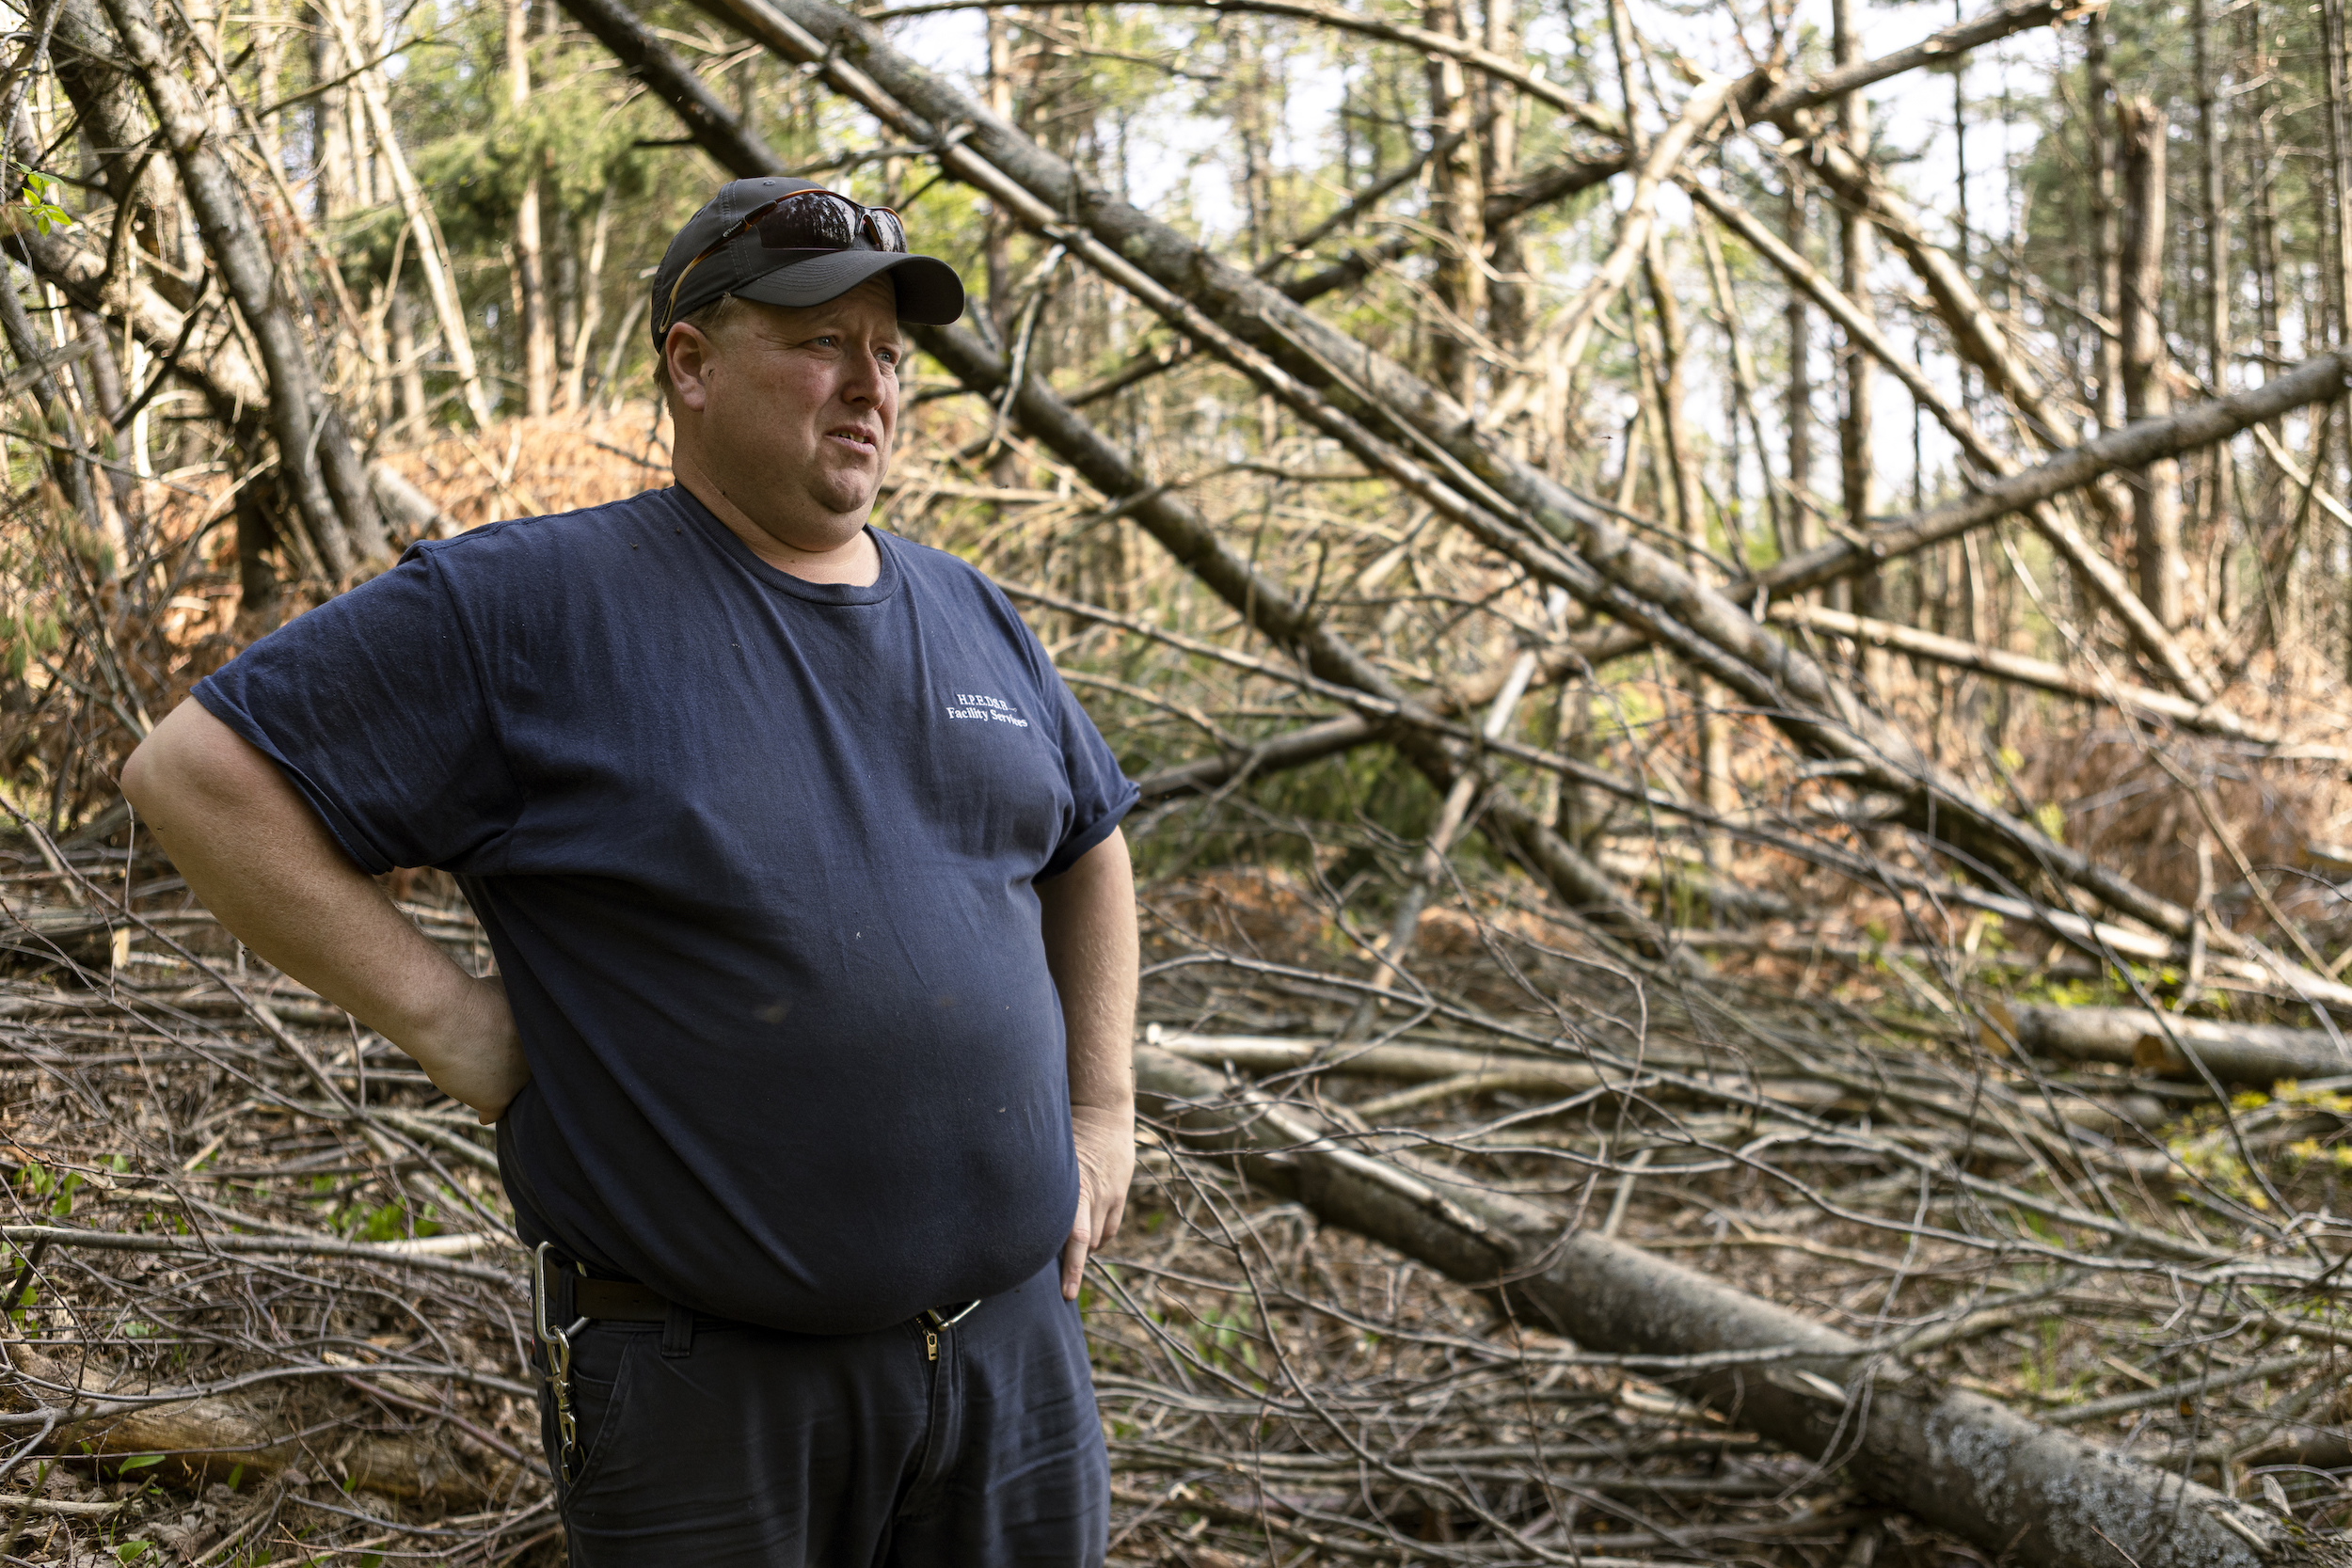 Shane Mumby had just cleared the trees felled by another storm, a derecho, off his trails last summer when the tornado struck.